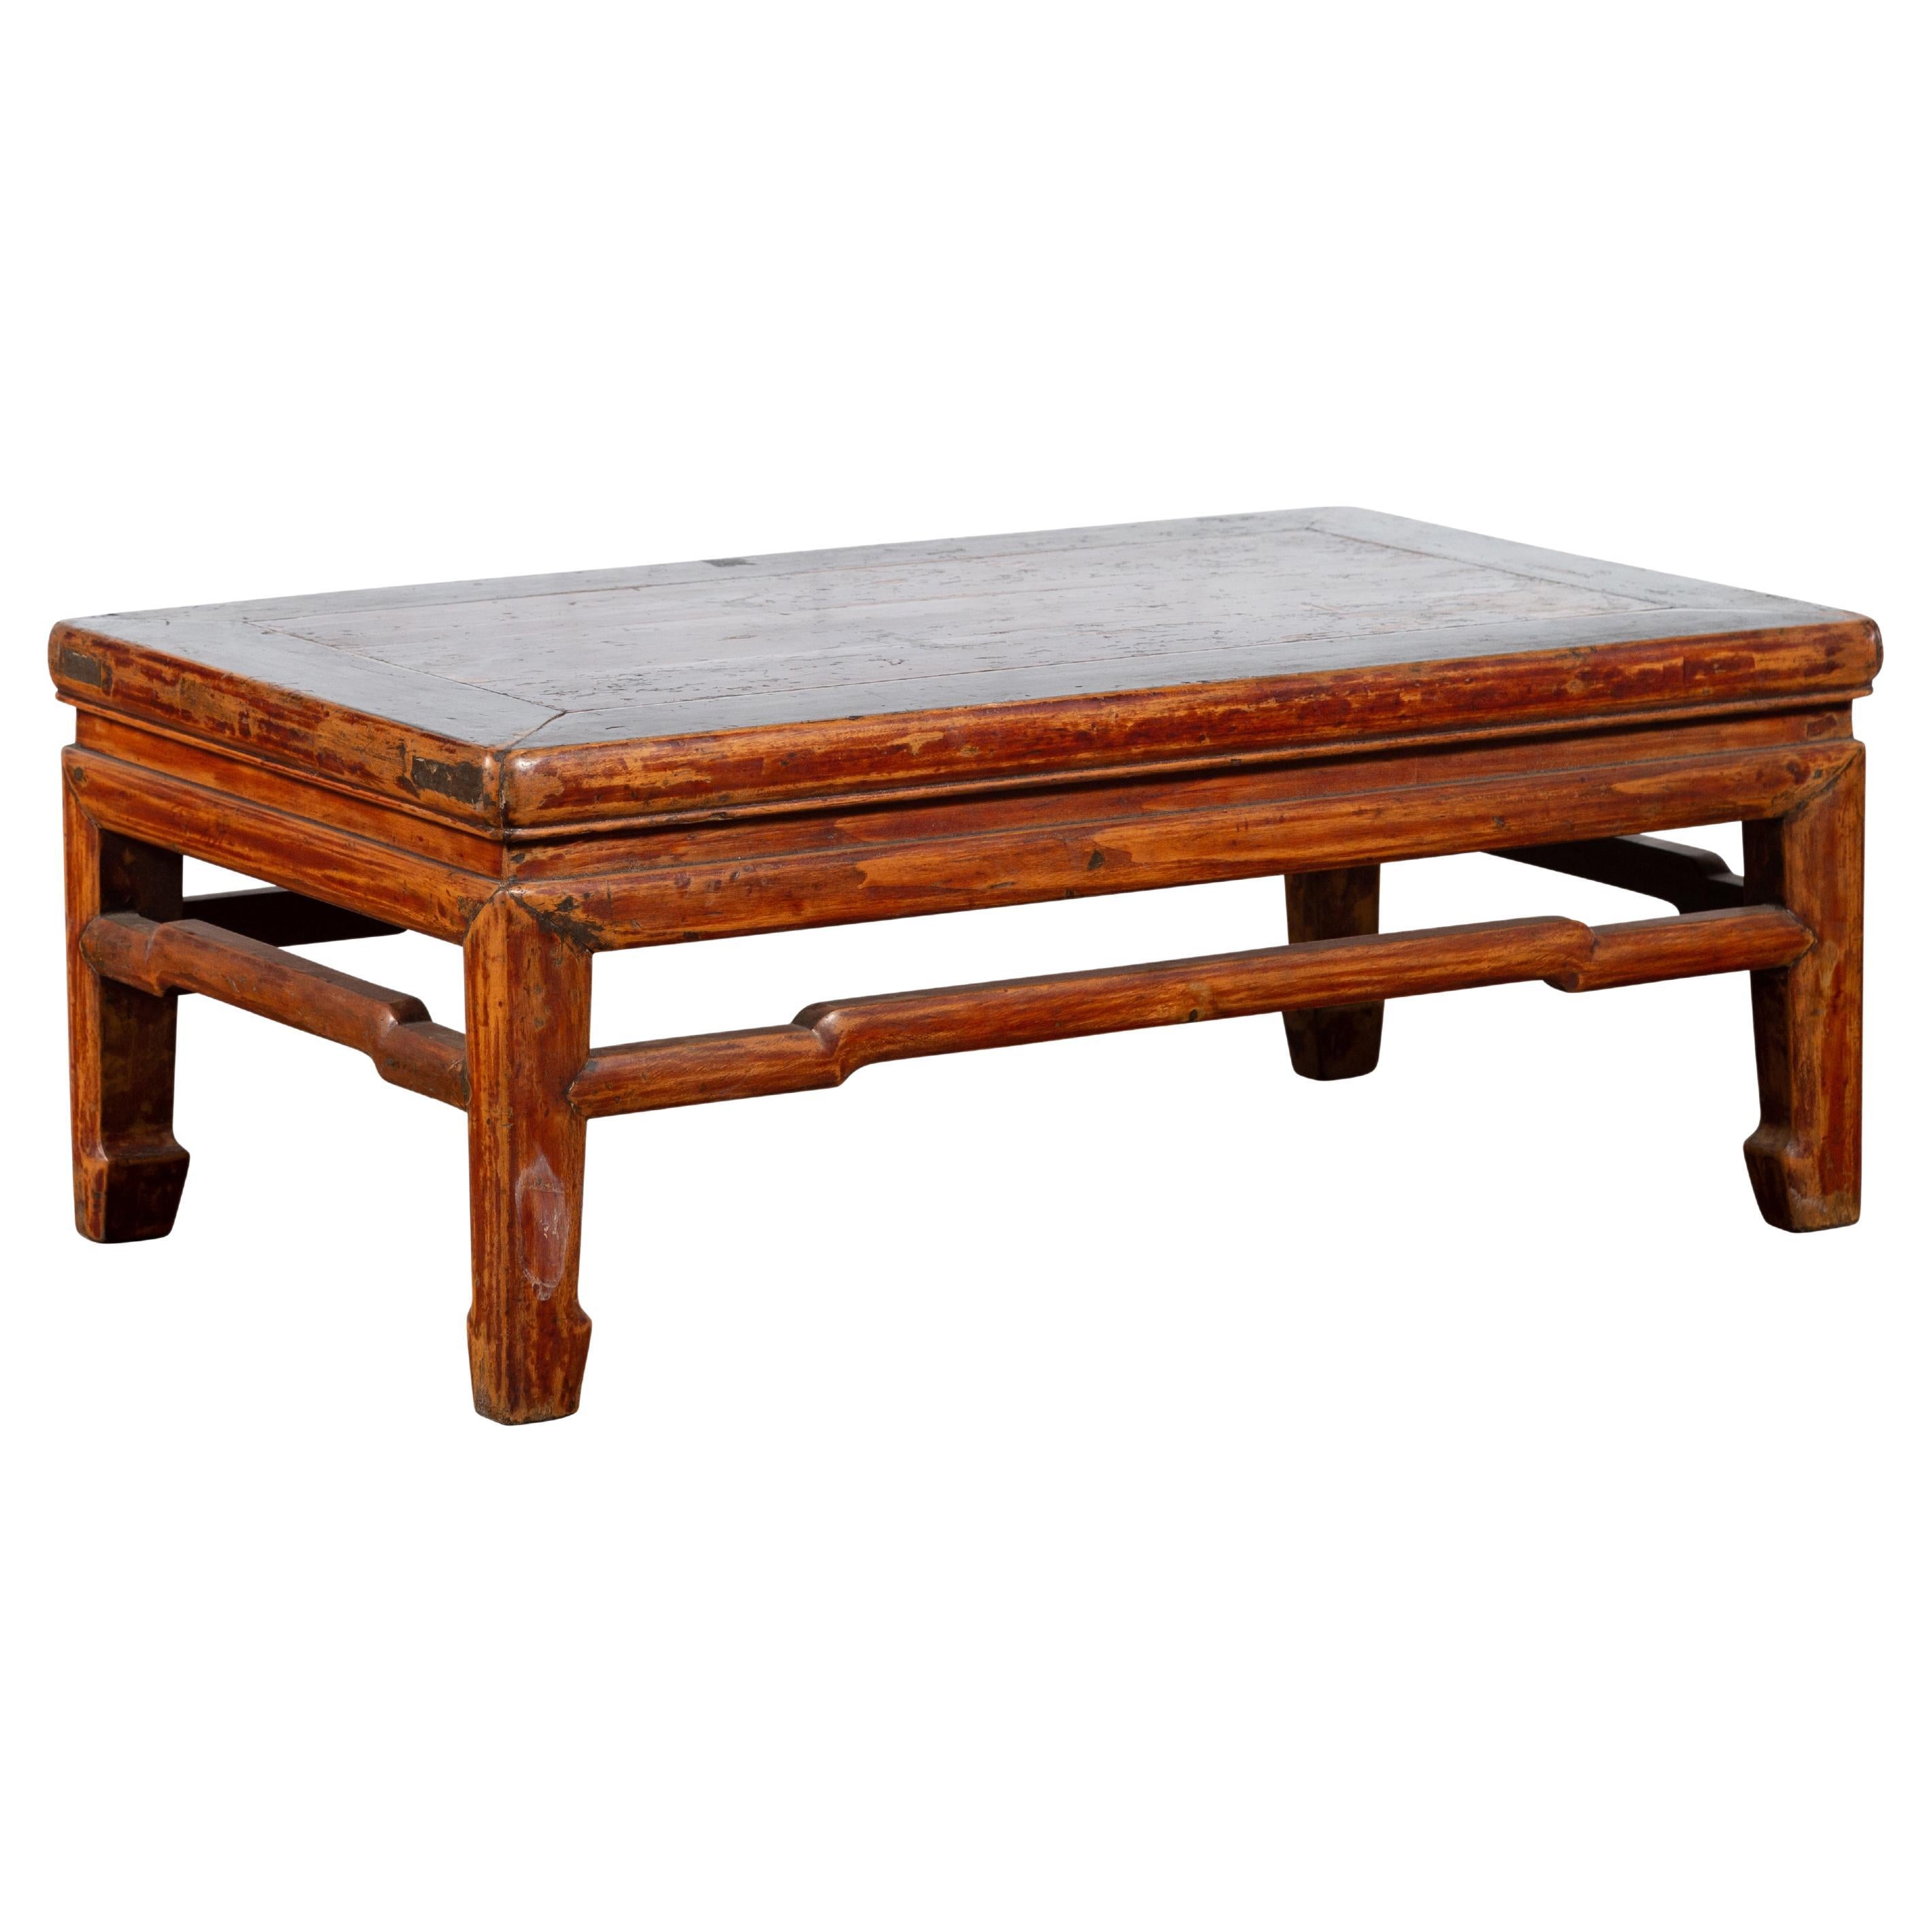 Qing Dynasty 19th Century Low Distressed Side Table with Humpback Stretchers For Sale